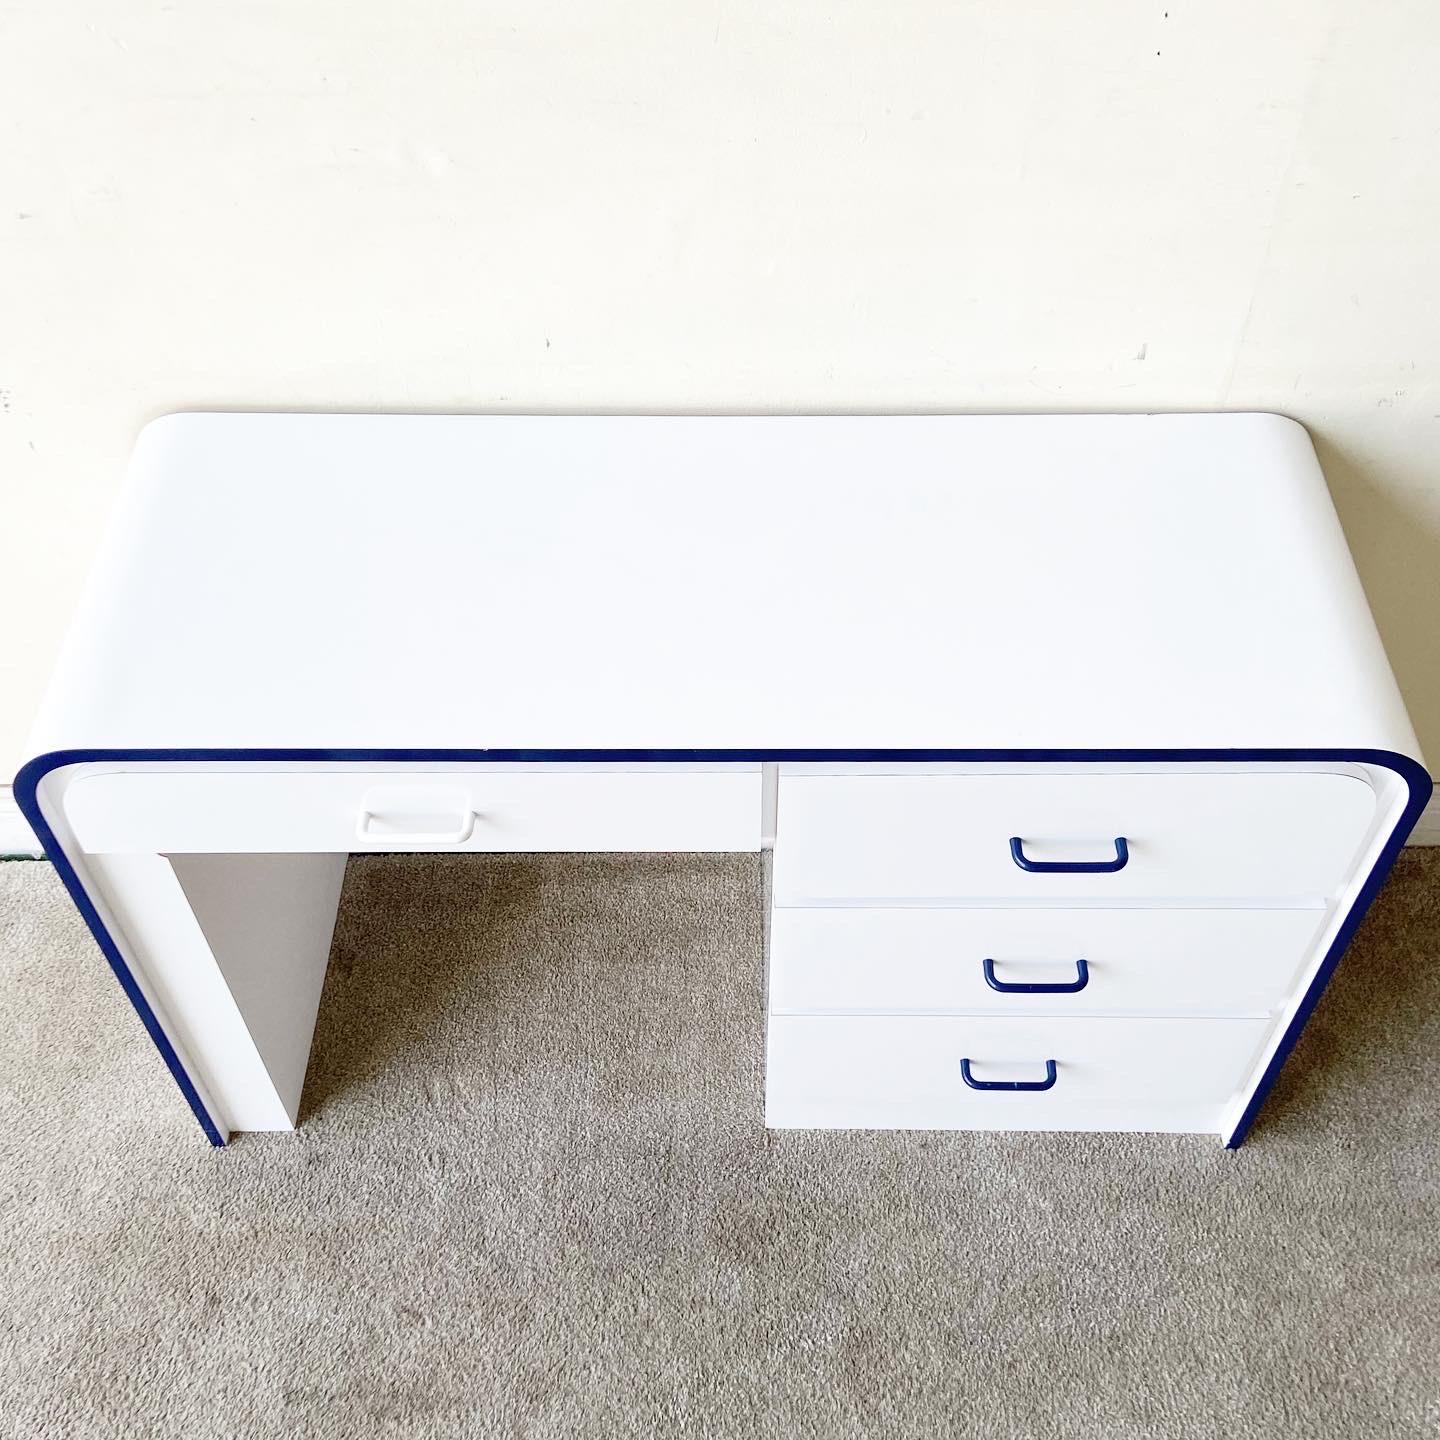 Exceptional postmodern white and blue lacquer laminate waterfall desk. Features 4 spacious drawers with white and blue drawer pulls.
 